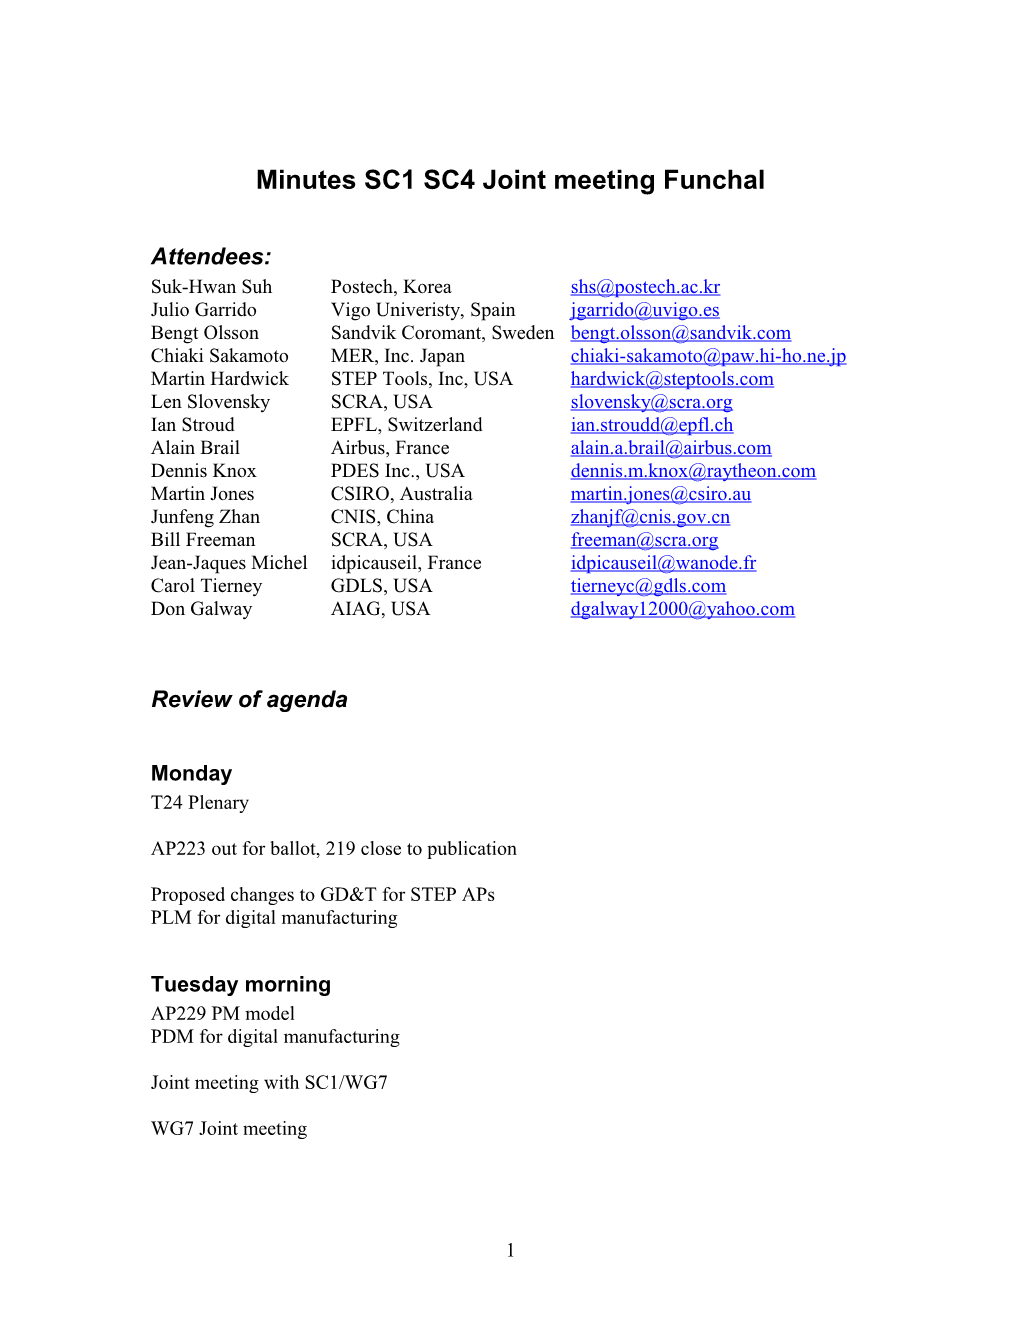 Minutes SC1 SC4 Joint Meeting Funchal